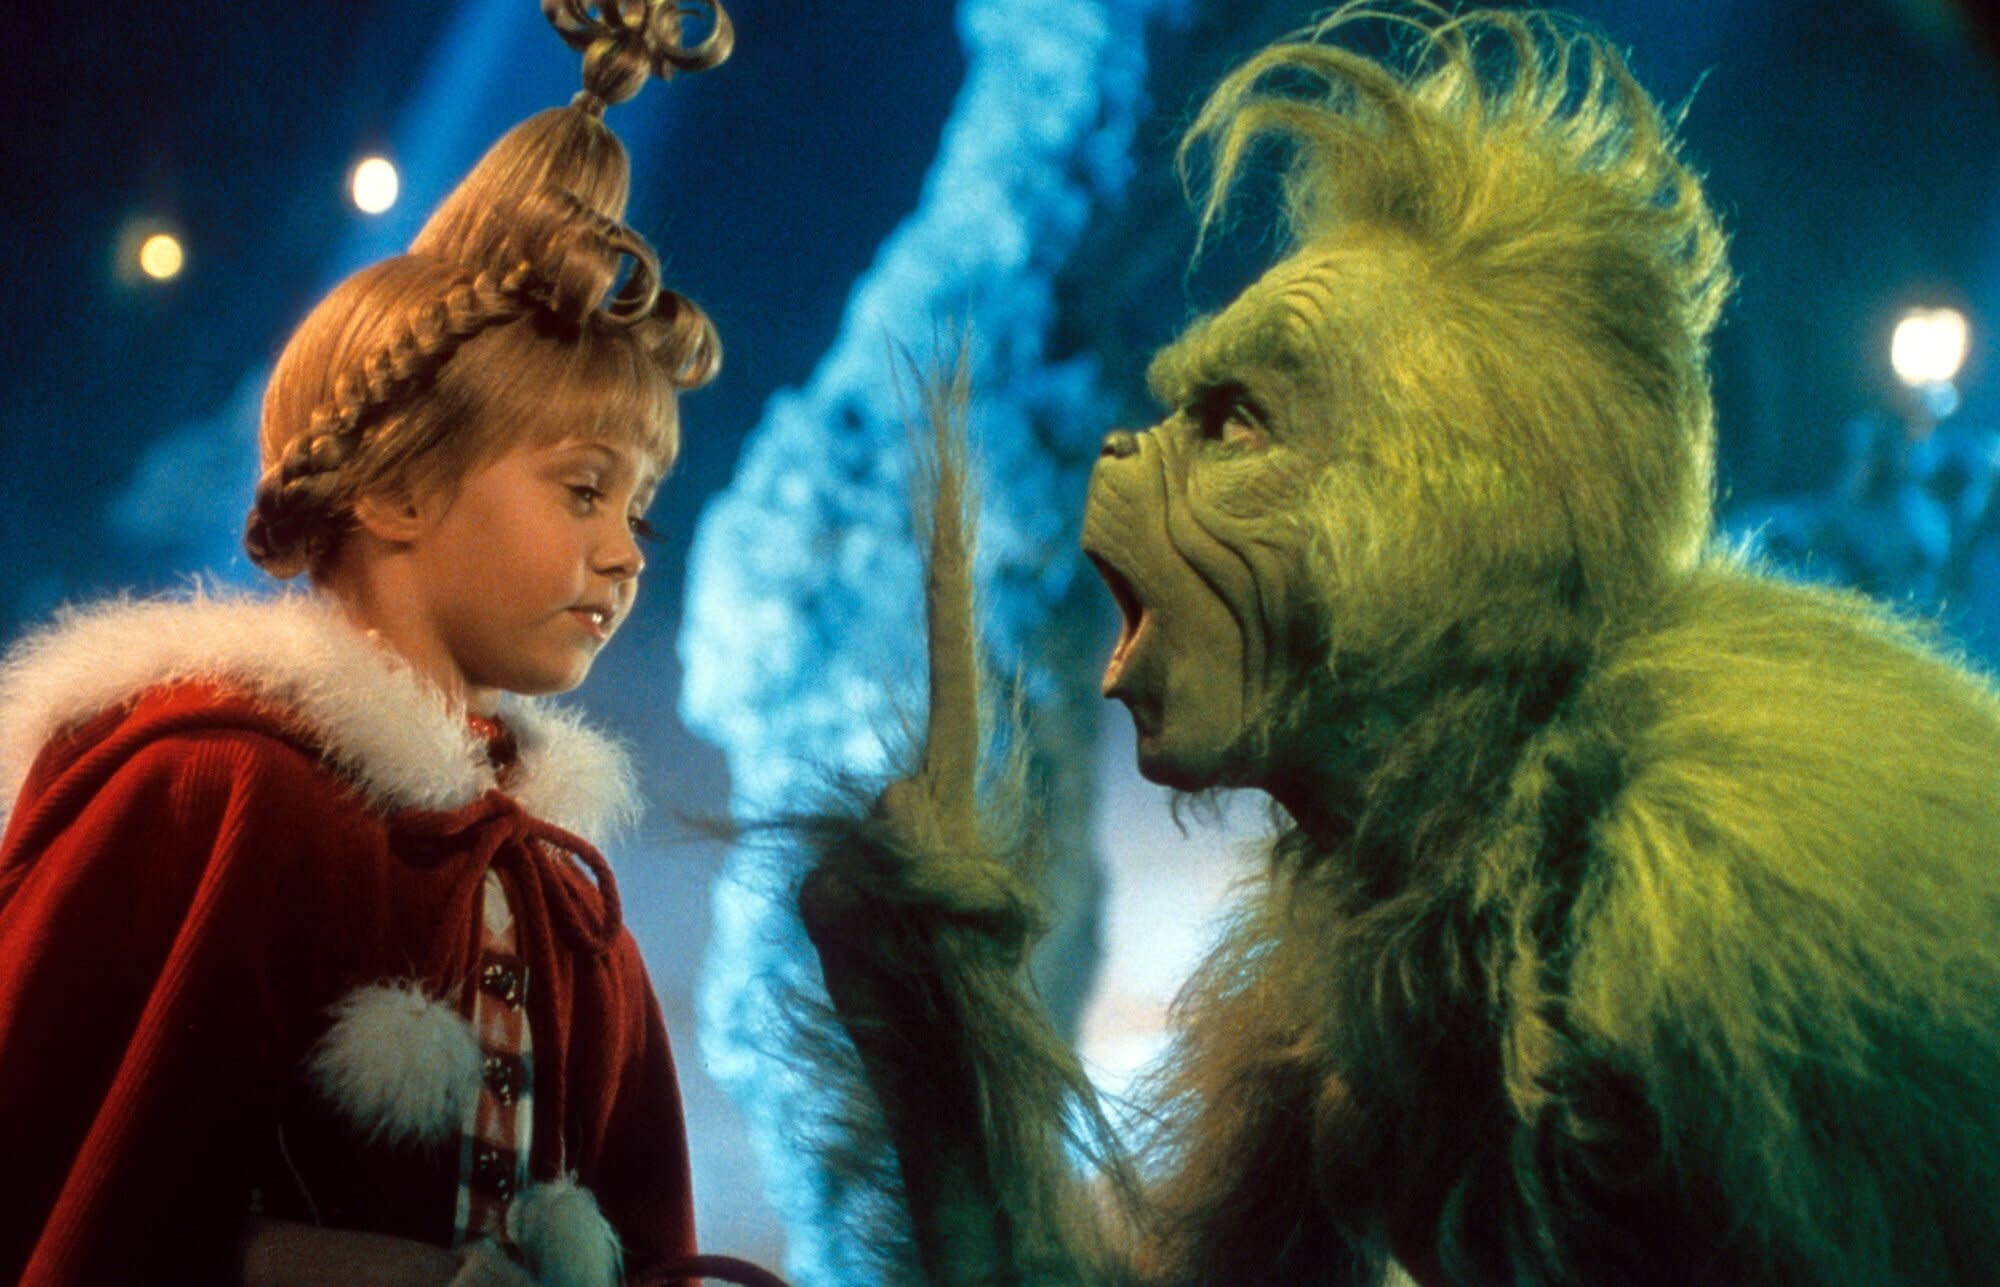 These Are the Most Popular '90s Christmas Movie Every State Across the U.S.